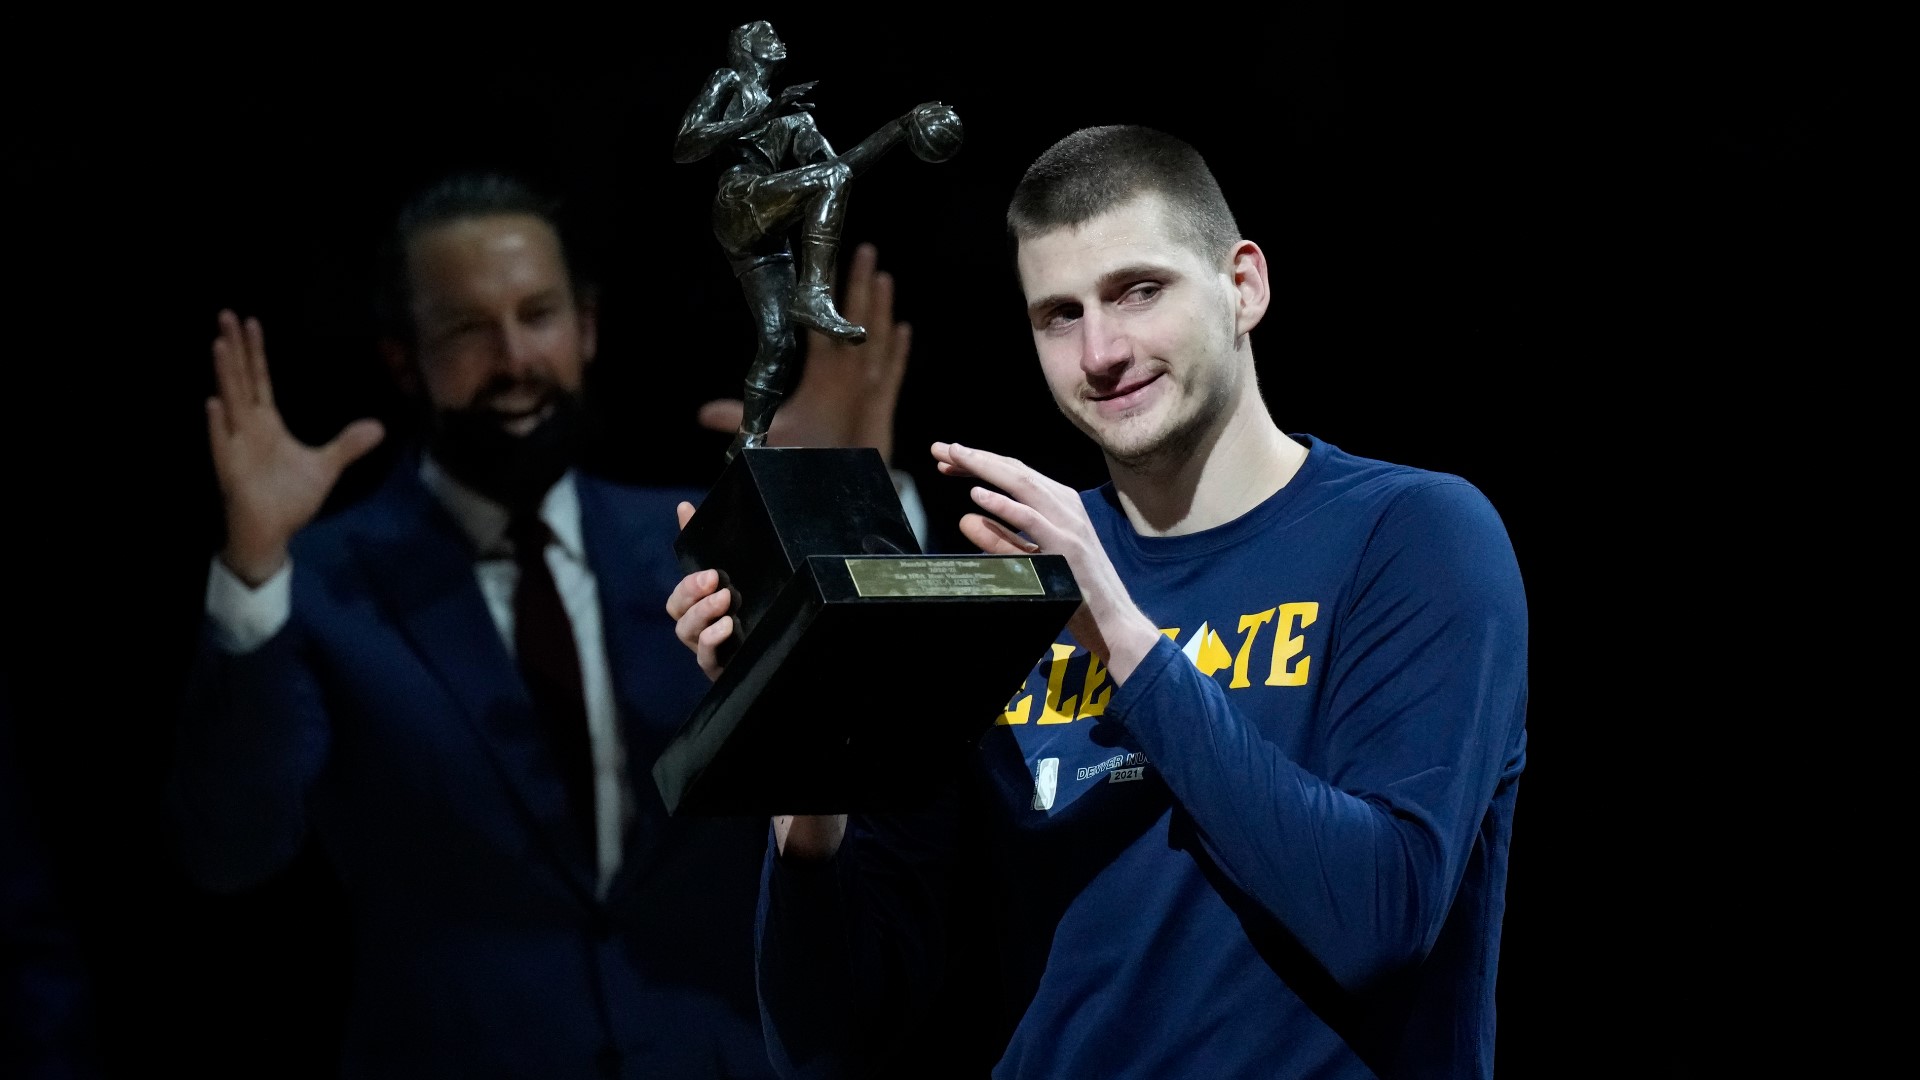 Nikola Jokic was the first player in NBA history with 2,000 points, 1,000 rebounds and 500 assists in a season.